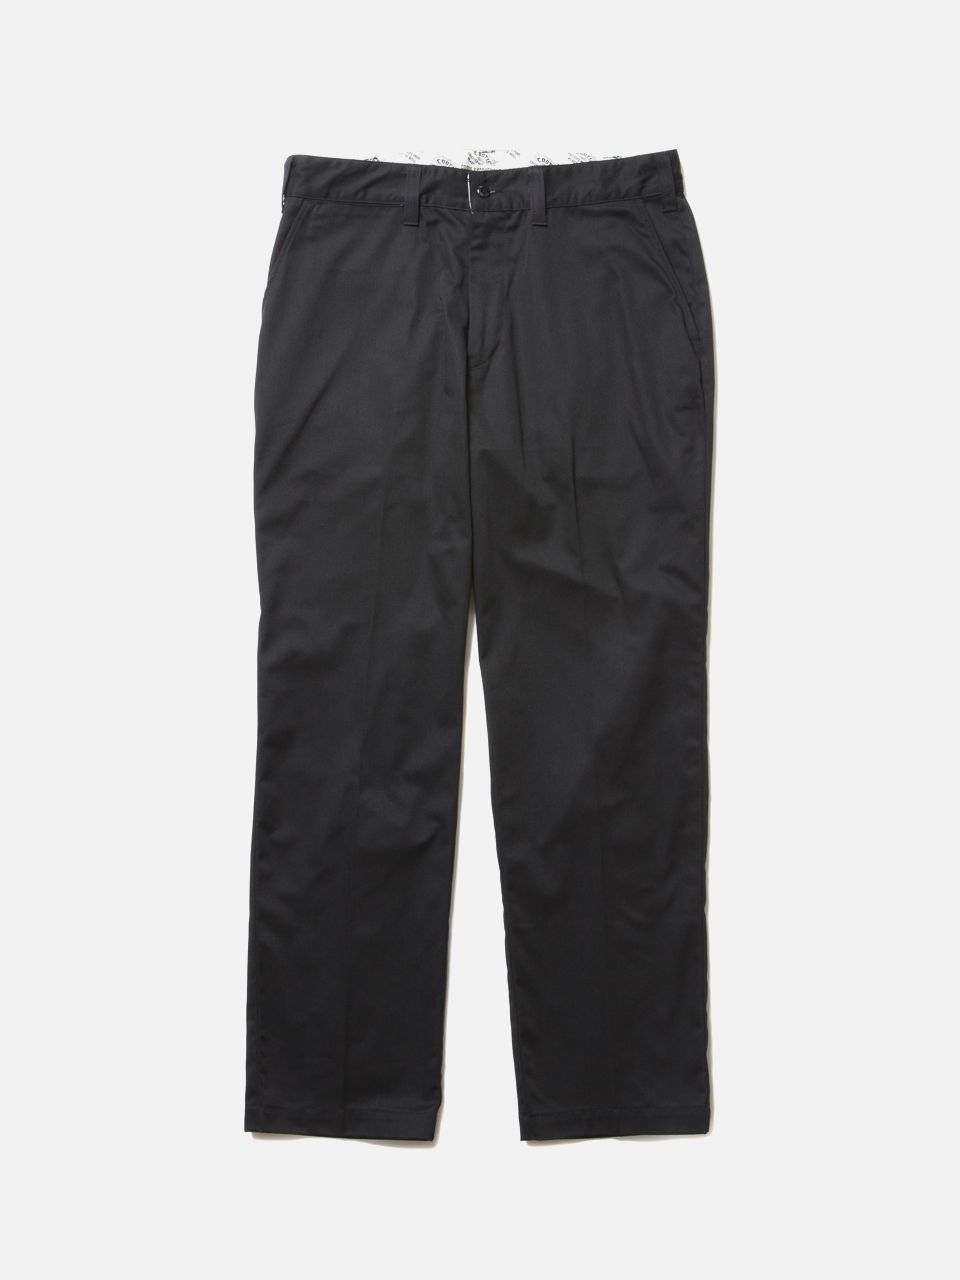 COOTIE   T/C  WORK TROUSERS ASH  GRAY